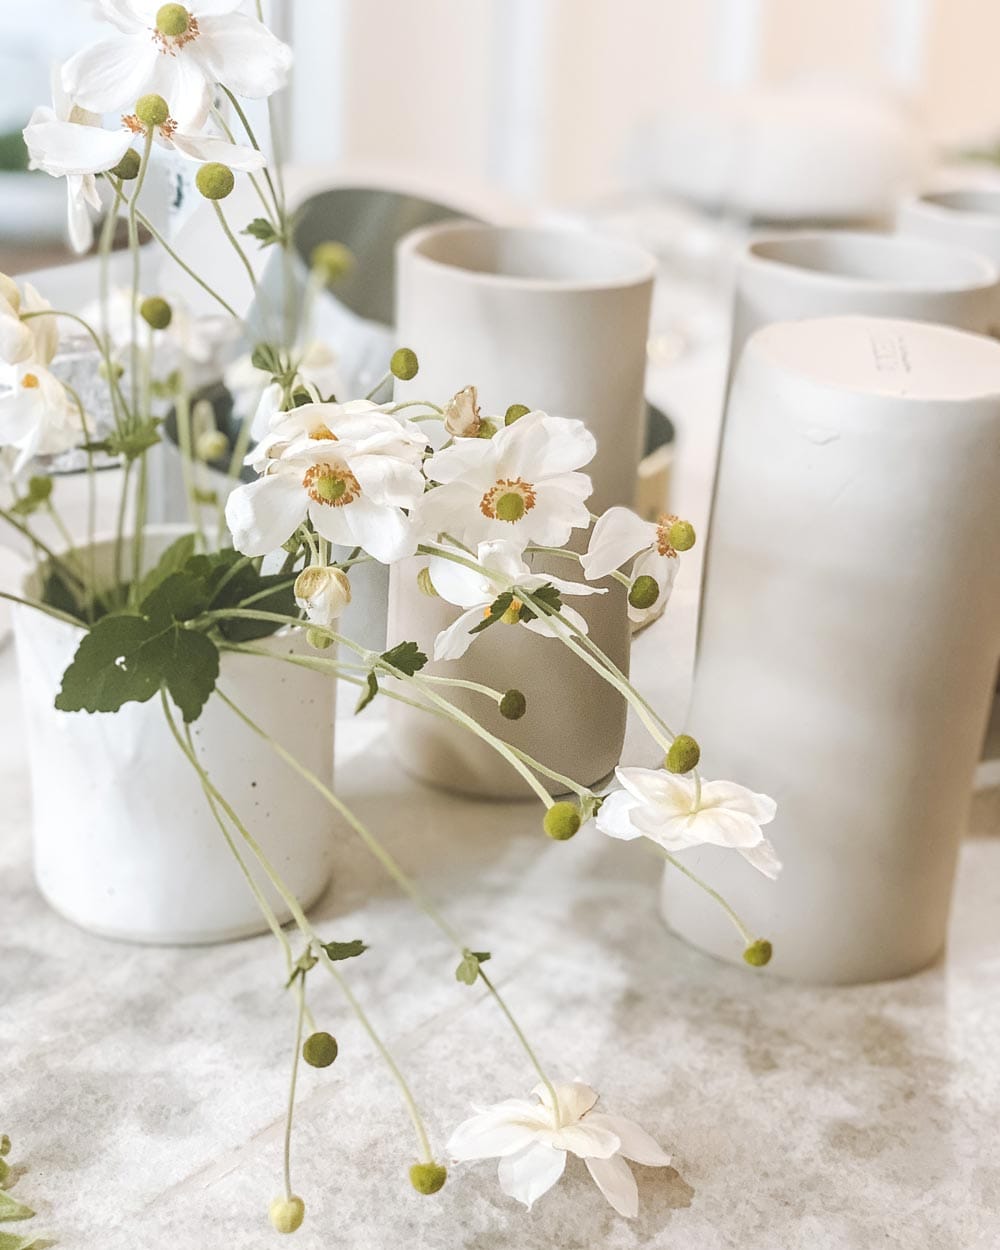 Make a vase  – Choose your own date